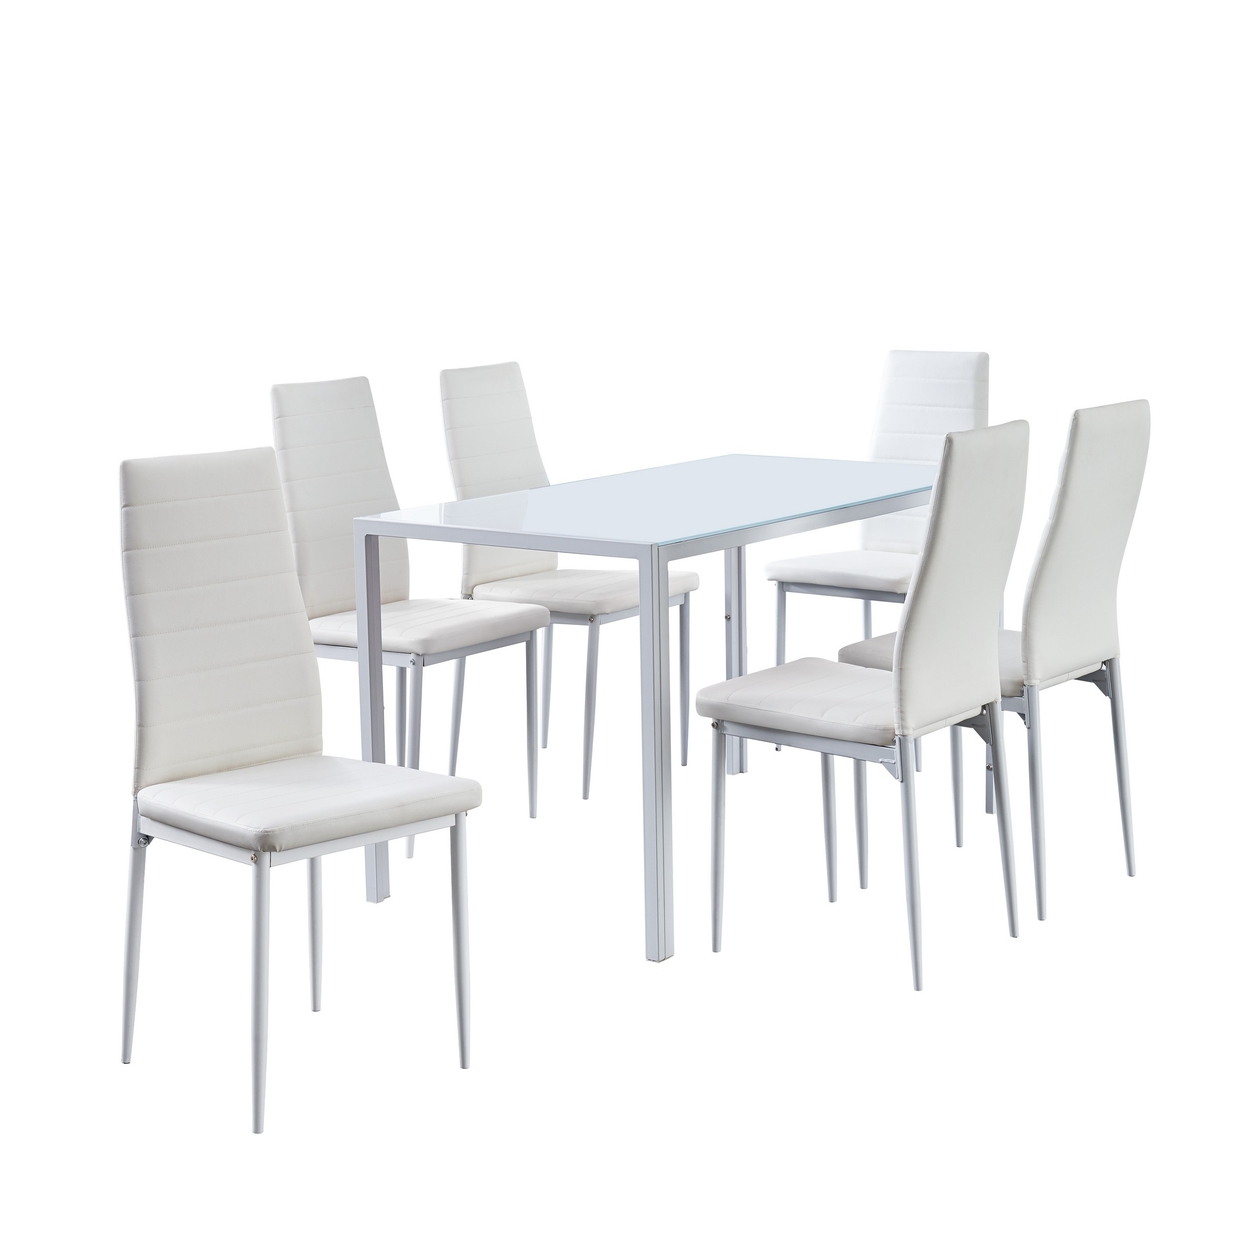 Ned 7 Piece Dining Set, White Faux Leather Tall Back Chairs, Metal Table- Saltoro Sherpi